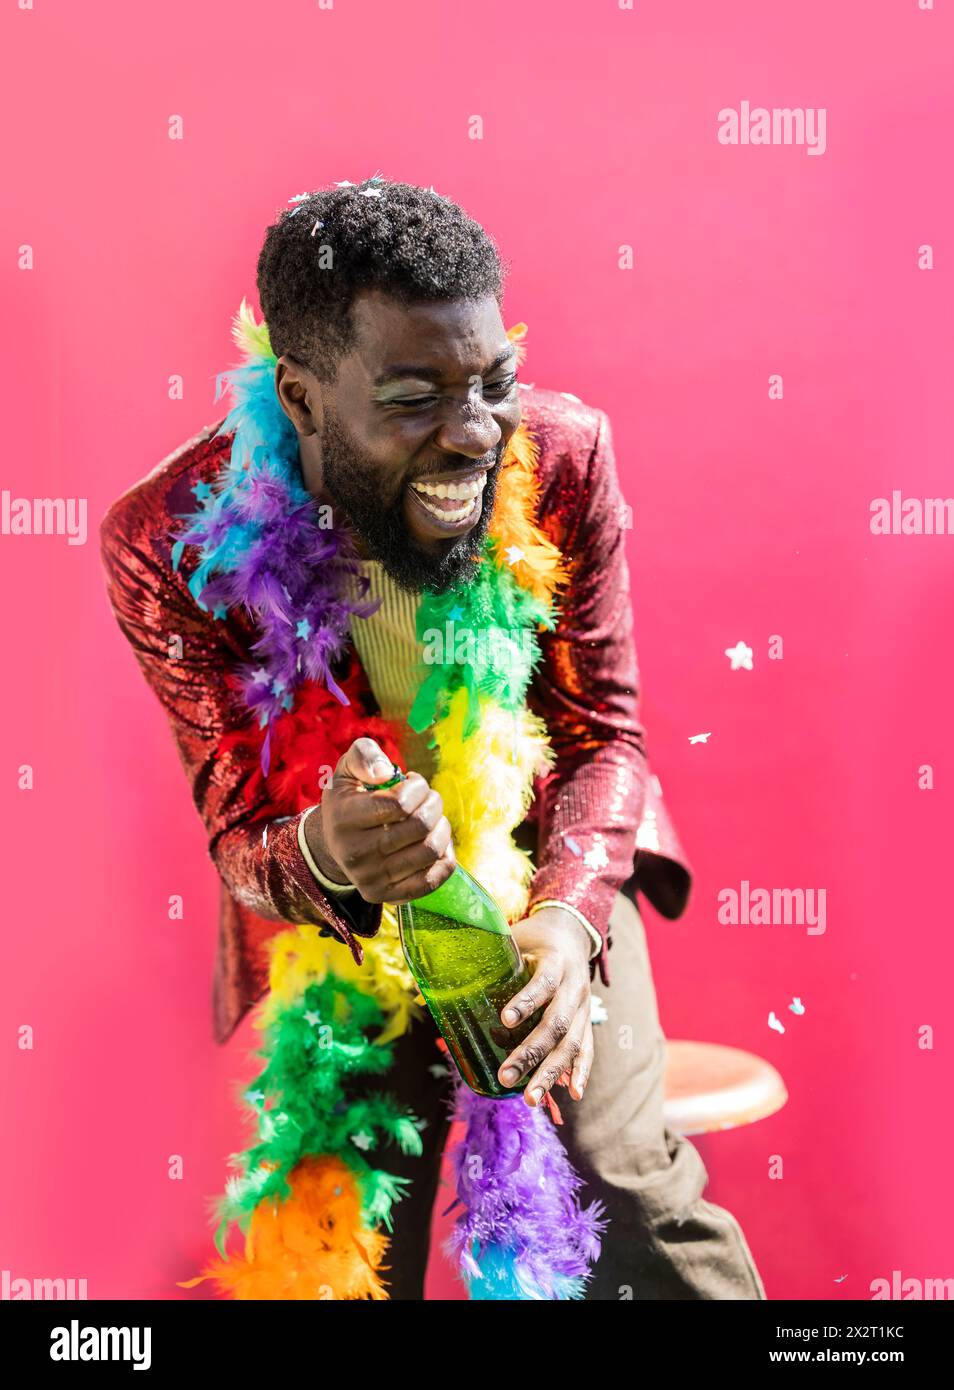 Young non-binary person holding champagne bottle and laughing against pink background Stock Photo